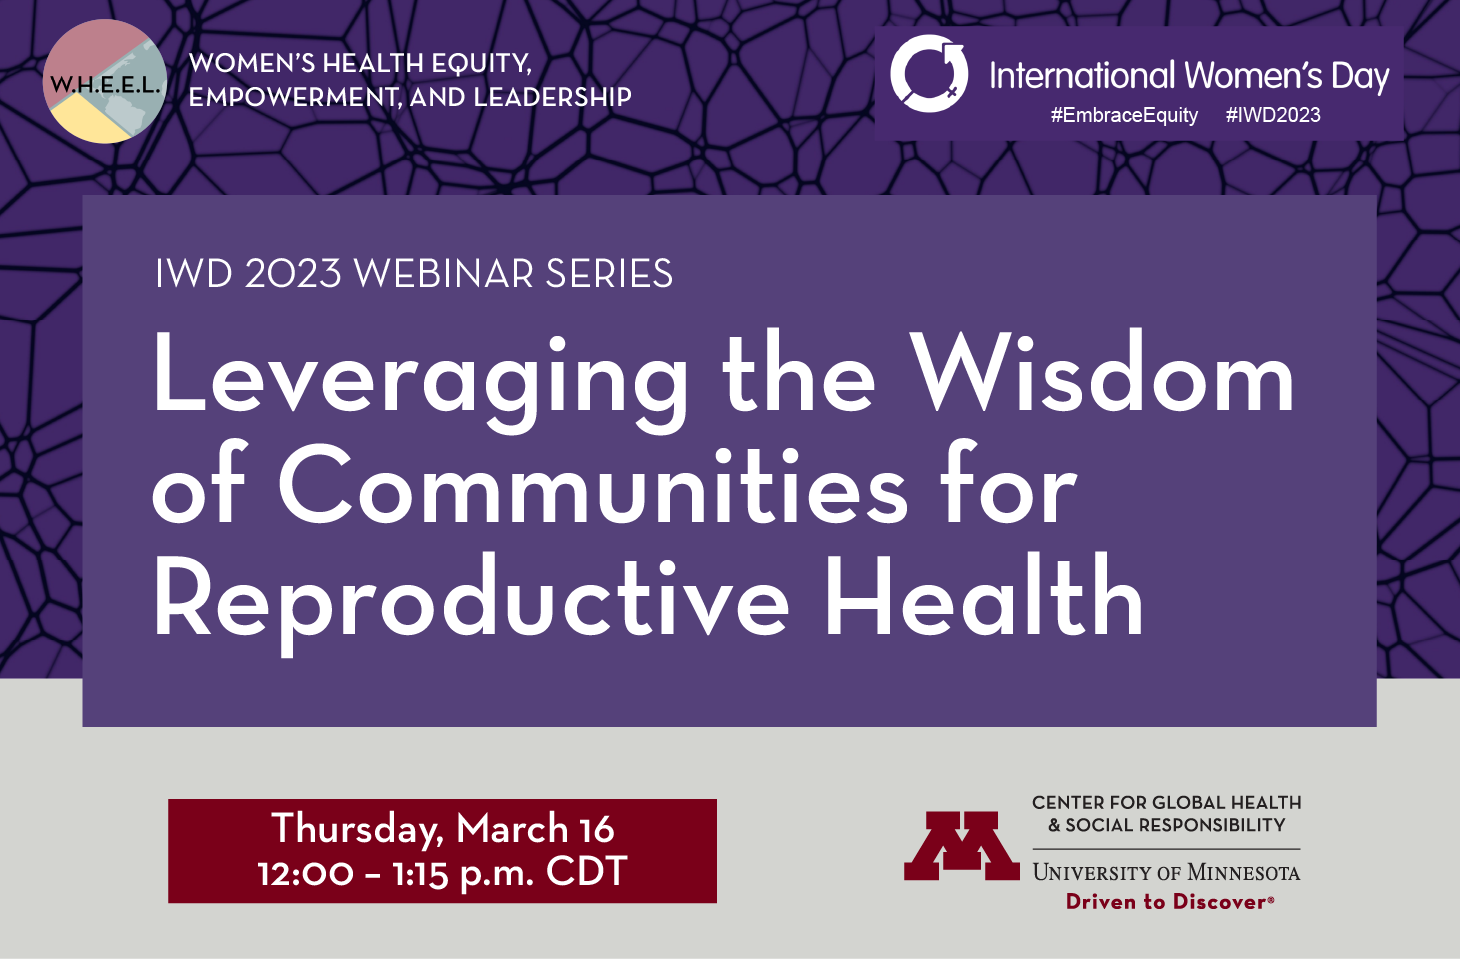 Leveraging the Wisdom of Communities for Reproductive Health text on a purple background.